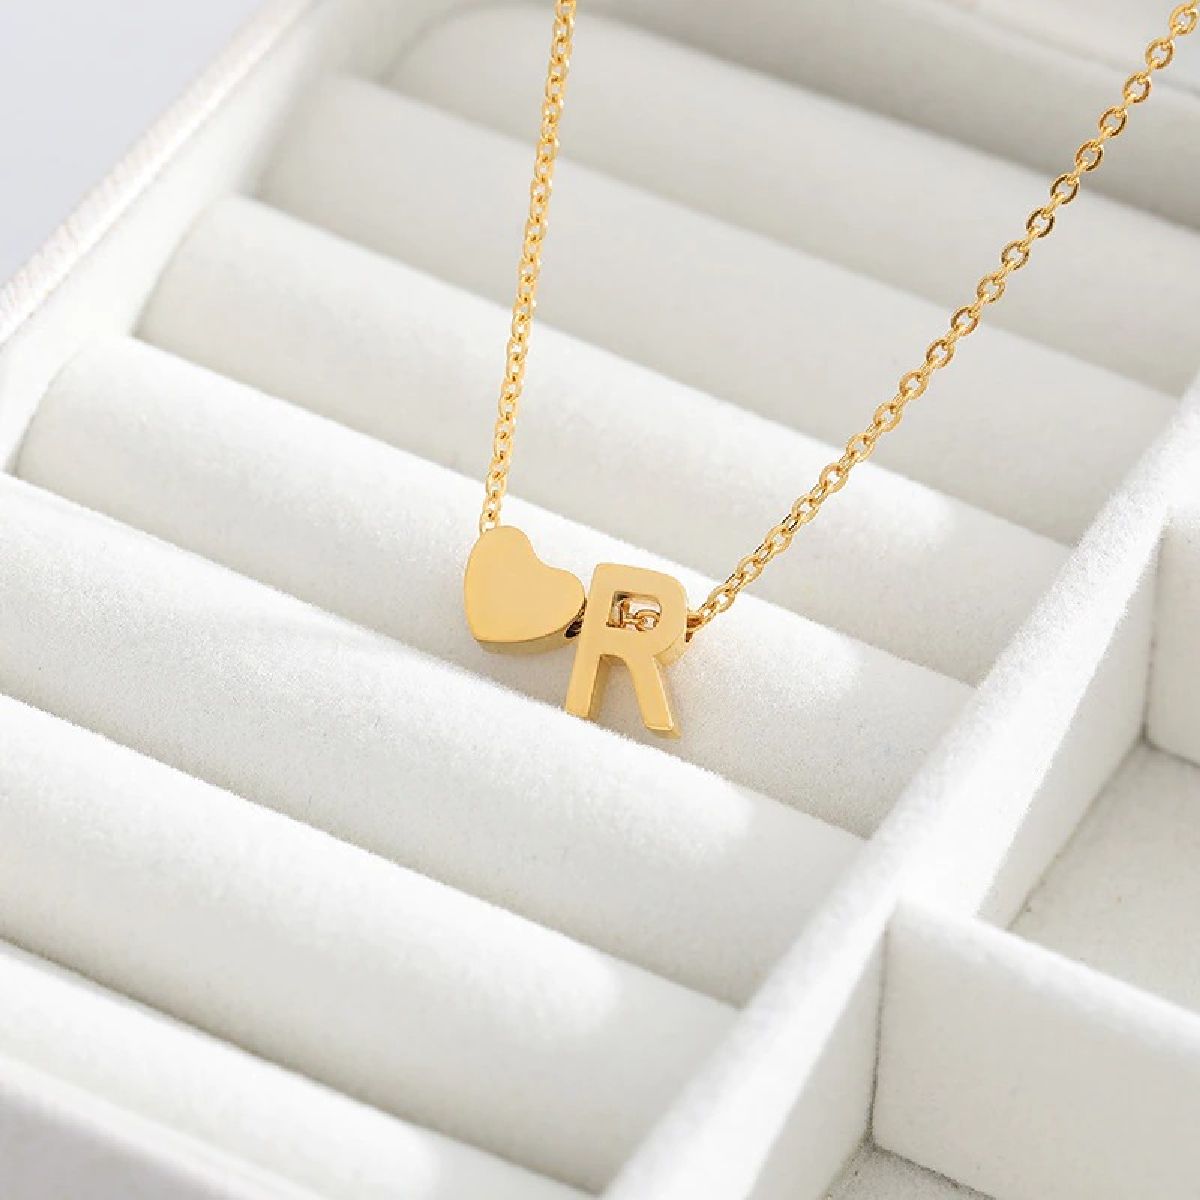 Buy Fashion Tiny Dainty Heart Initial Necklace P Letter Necklace Name  Jewelry for Women at Amazon.in